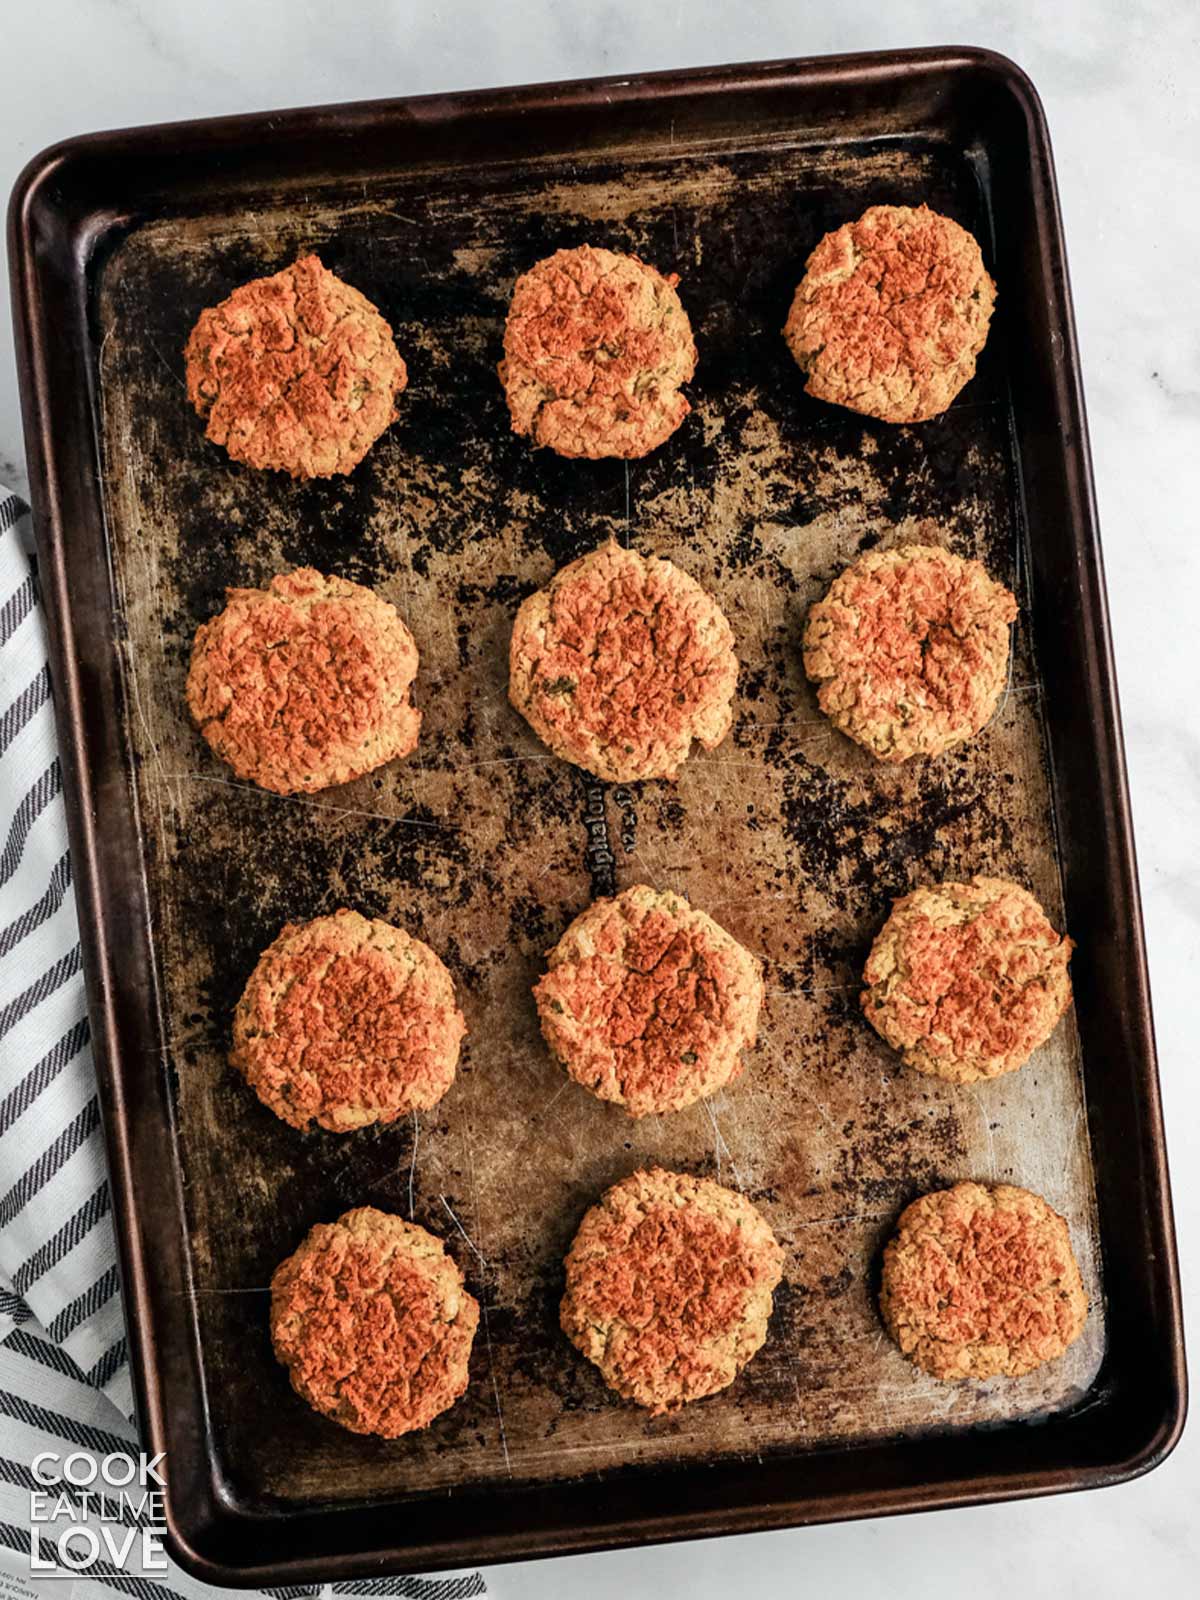 Fresh from the oven, falafel is still on the baking tray.